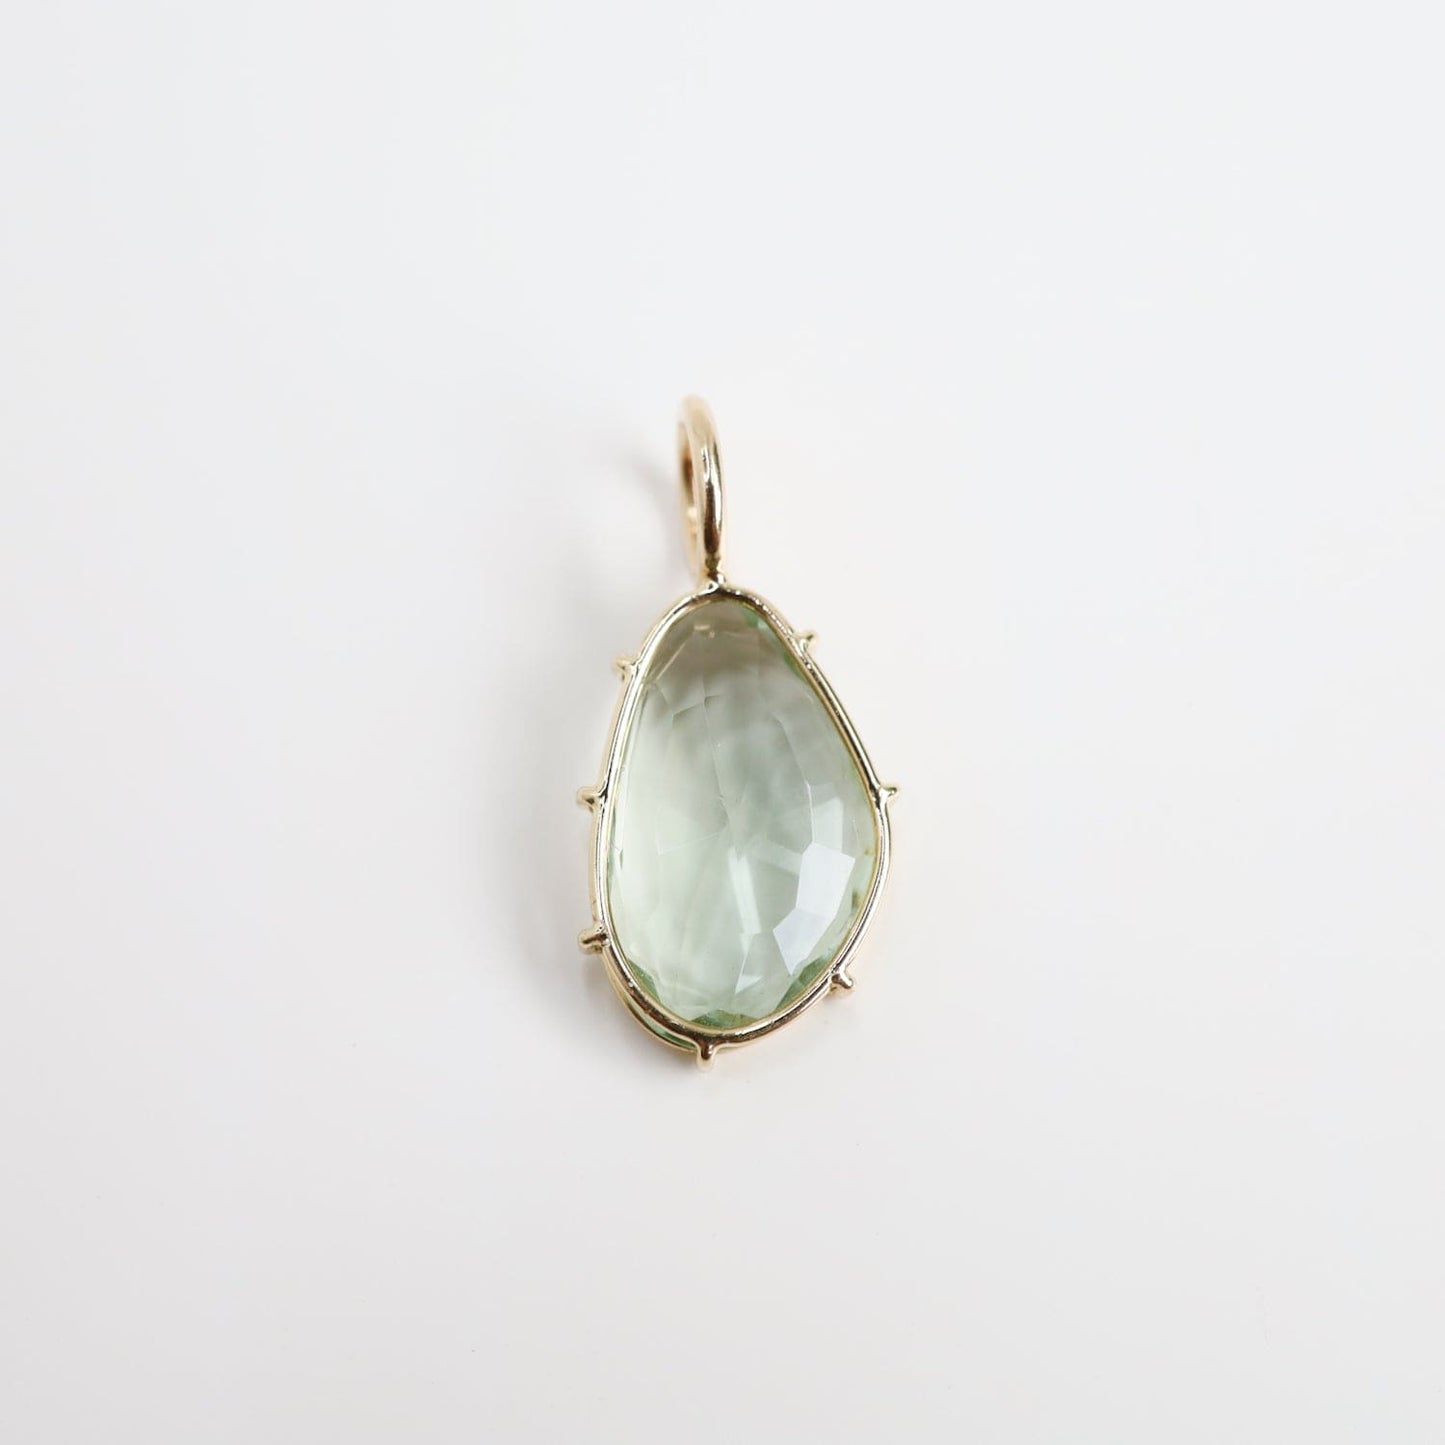 CHM One of a Kind Green Amethyst Harriet Stone Charm